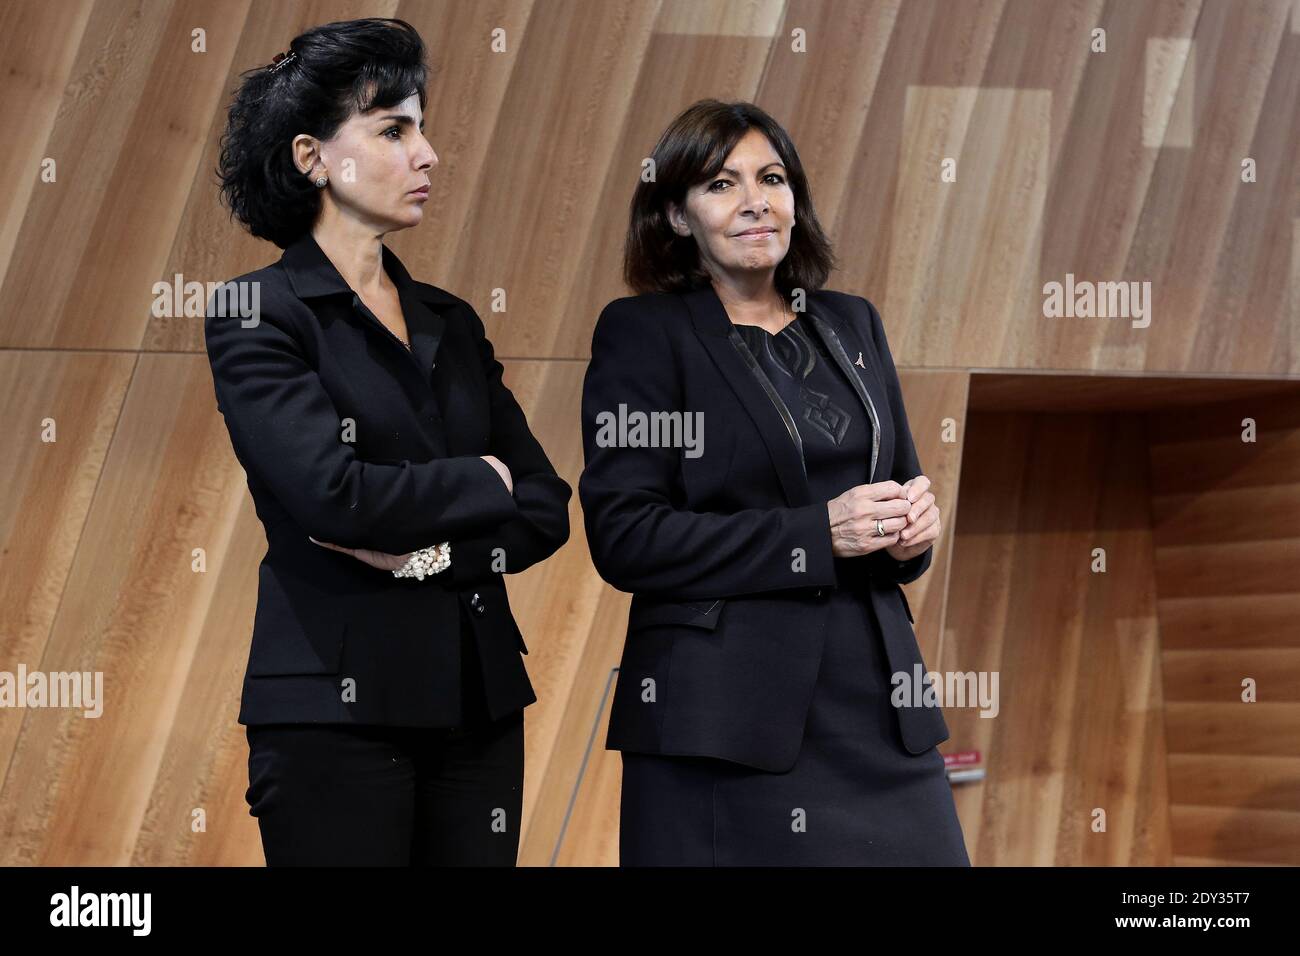 Paris' mayor Anne Hidalgo and former minister Rachida Dati take part in the inauguration of the new Eiffel Tower glass floor area in Paris on October 6, 2014. The Eiffel Tower is inaugurating today a new glass floor that is turning the heads of the millions of tourists who flock to Paris's best-known landmark every year. Photo by Stephane Lemouton/ABACAPRESS.COM Stock Photo